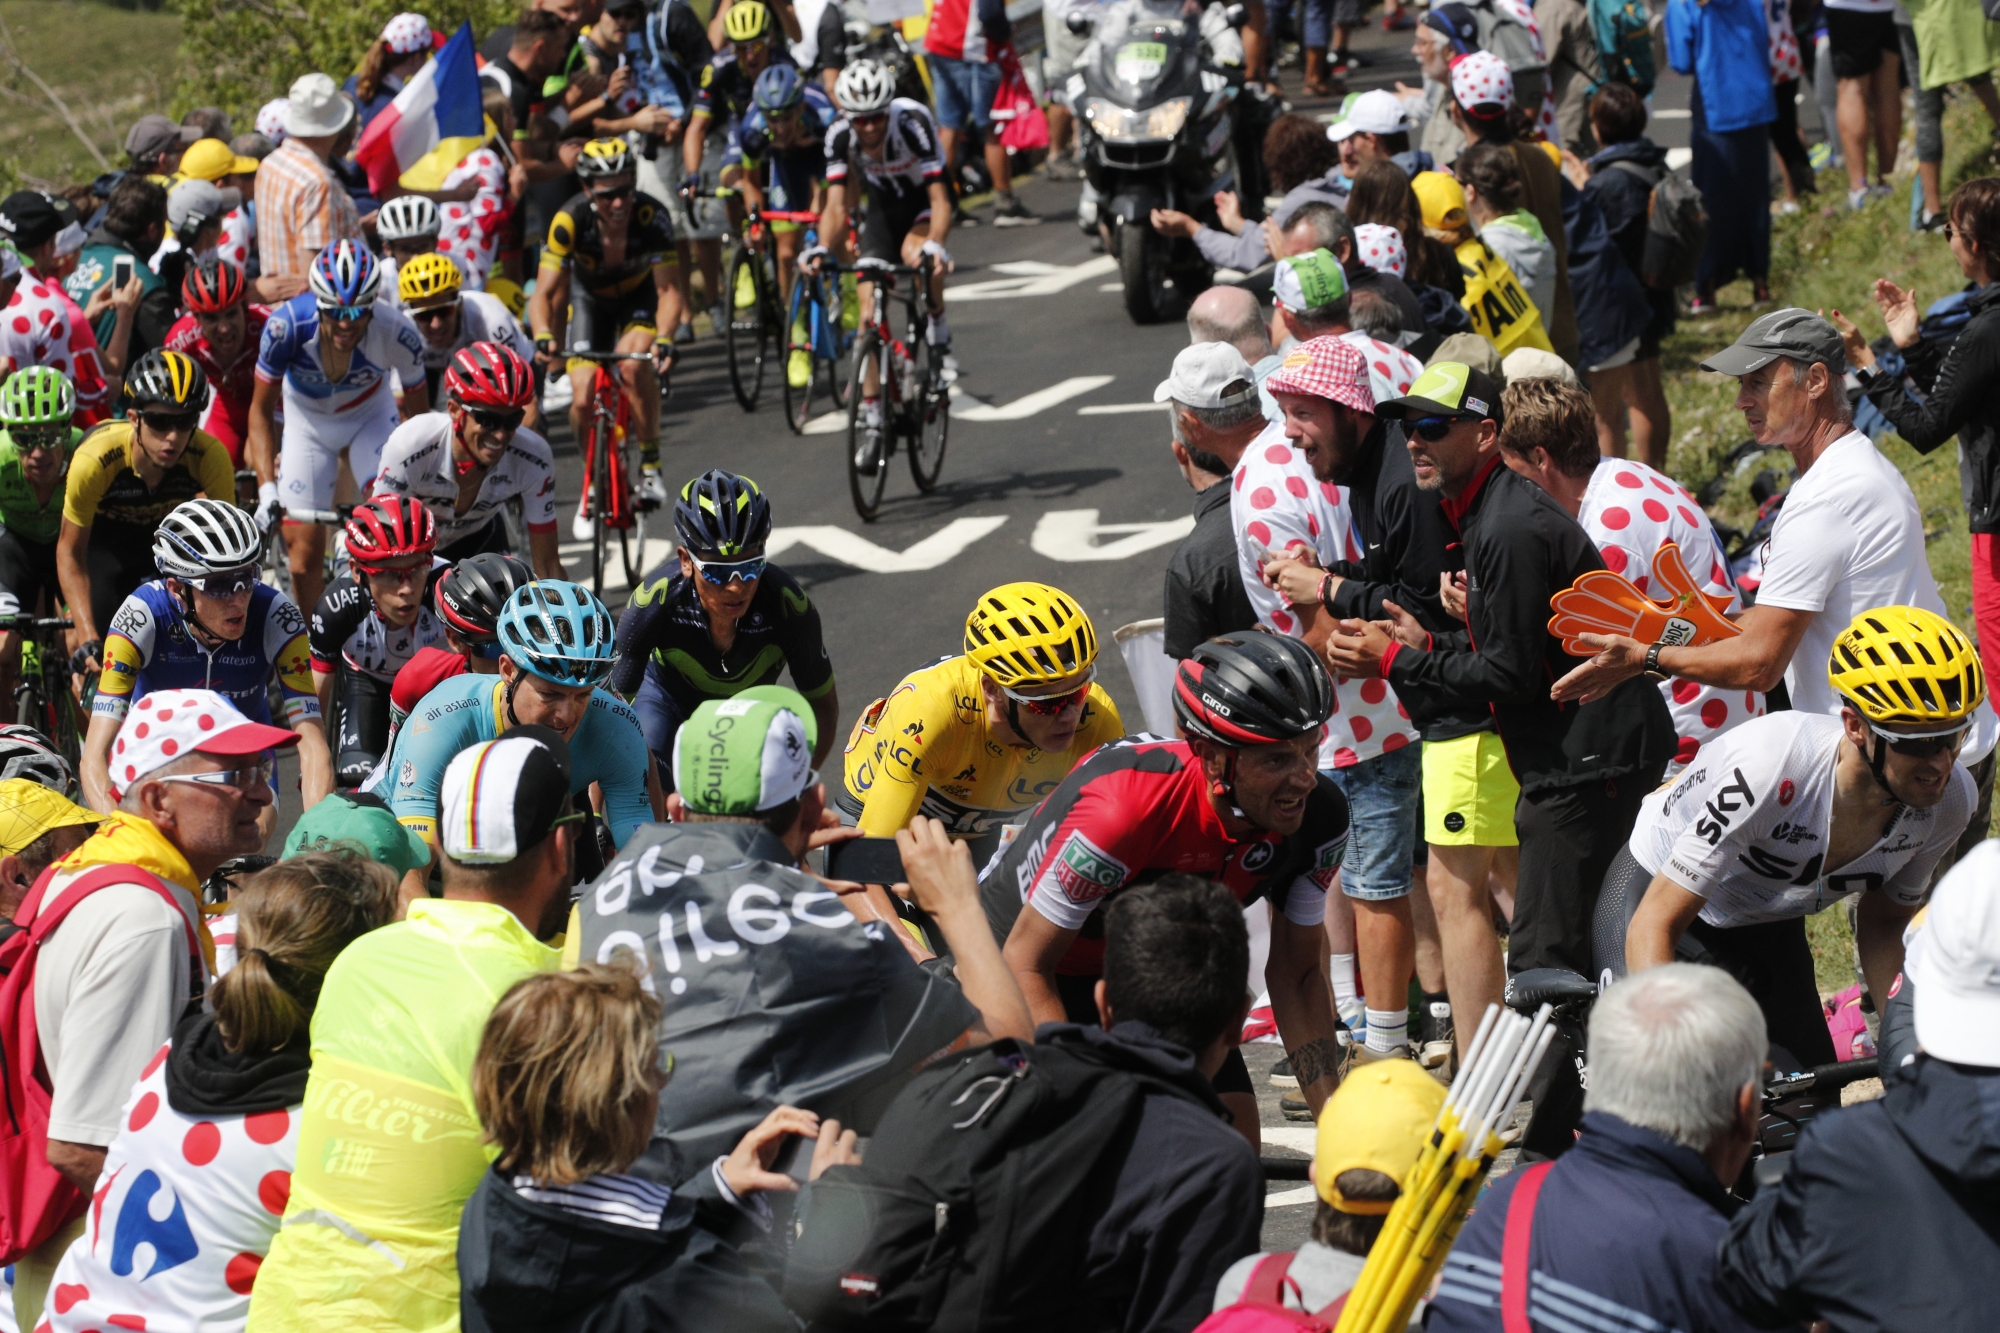 Britain's Chris Froome, wearing the overall leader's yellow jersey, is followed by Denmark's Jakob Fuglsang, Australia's Richie Porte, Colombia's Nairo Quintana, and Ireland's Daniel Martin, far left in blue and yellow, as he climbs towards Grand Colombier pass during the ninth stage of the Tour de France cycling race over 181.5 kilometers (112.8 miles) with start in Nantua and finish in Chambery, France, Sunday, July 9, 2017. (AP Photo/Christophe Ena) France Cycling Tour de France